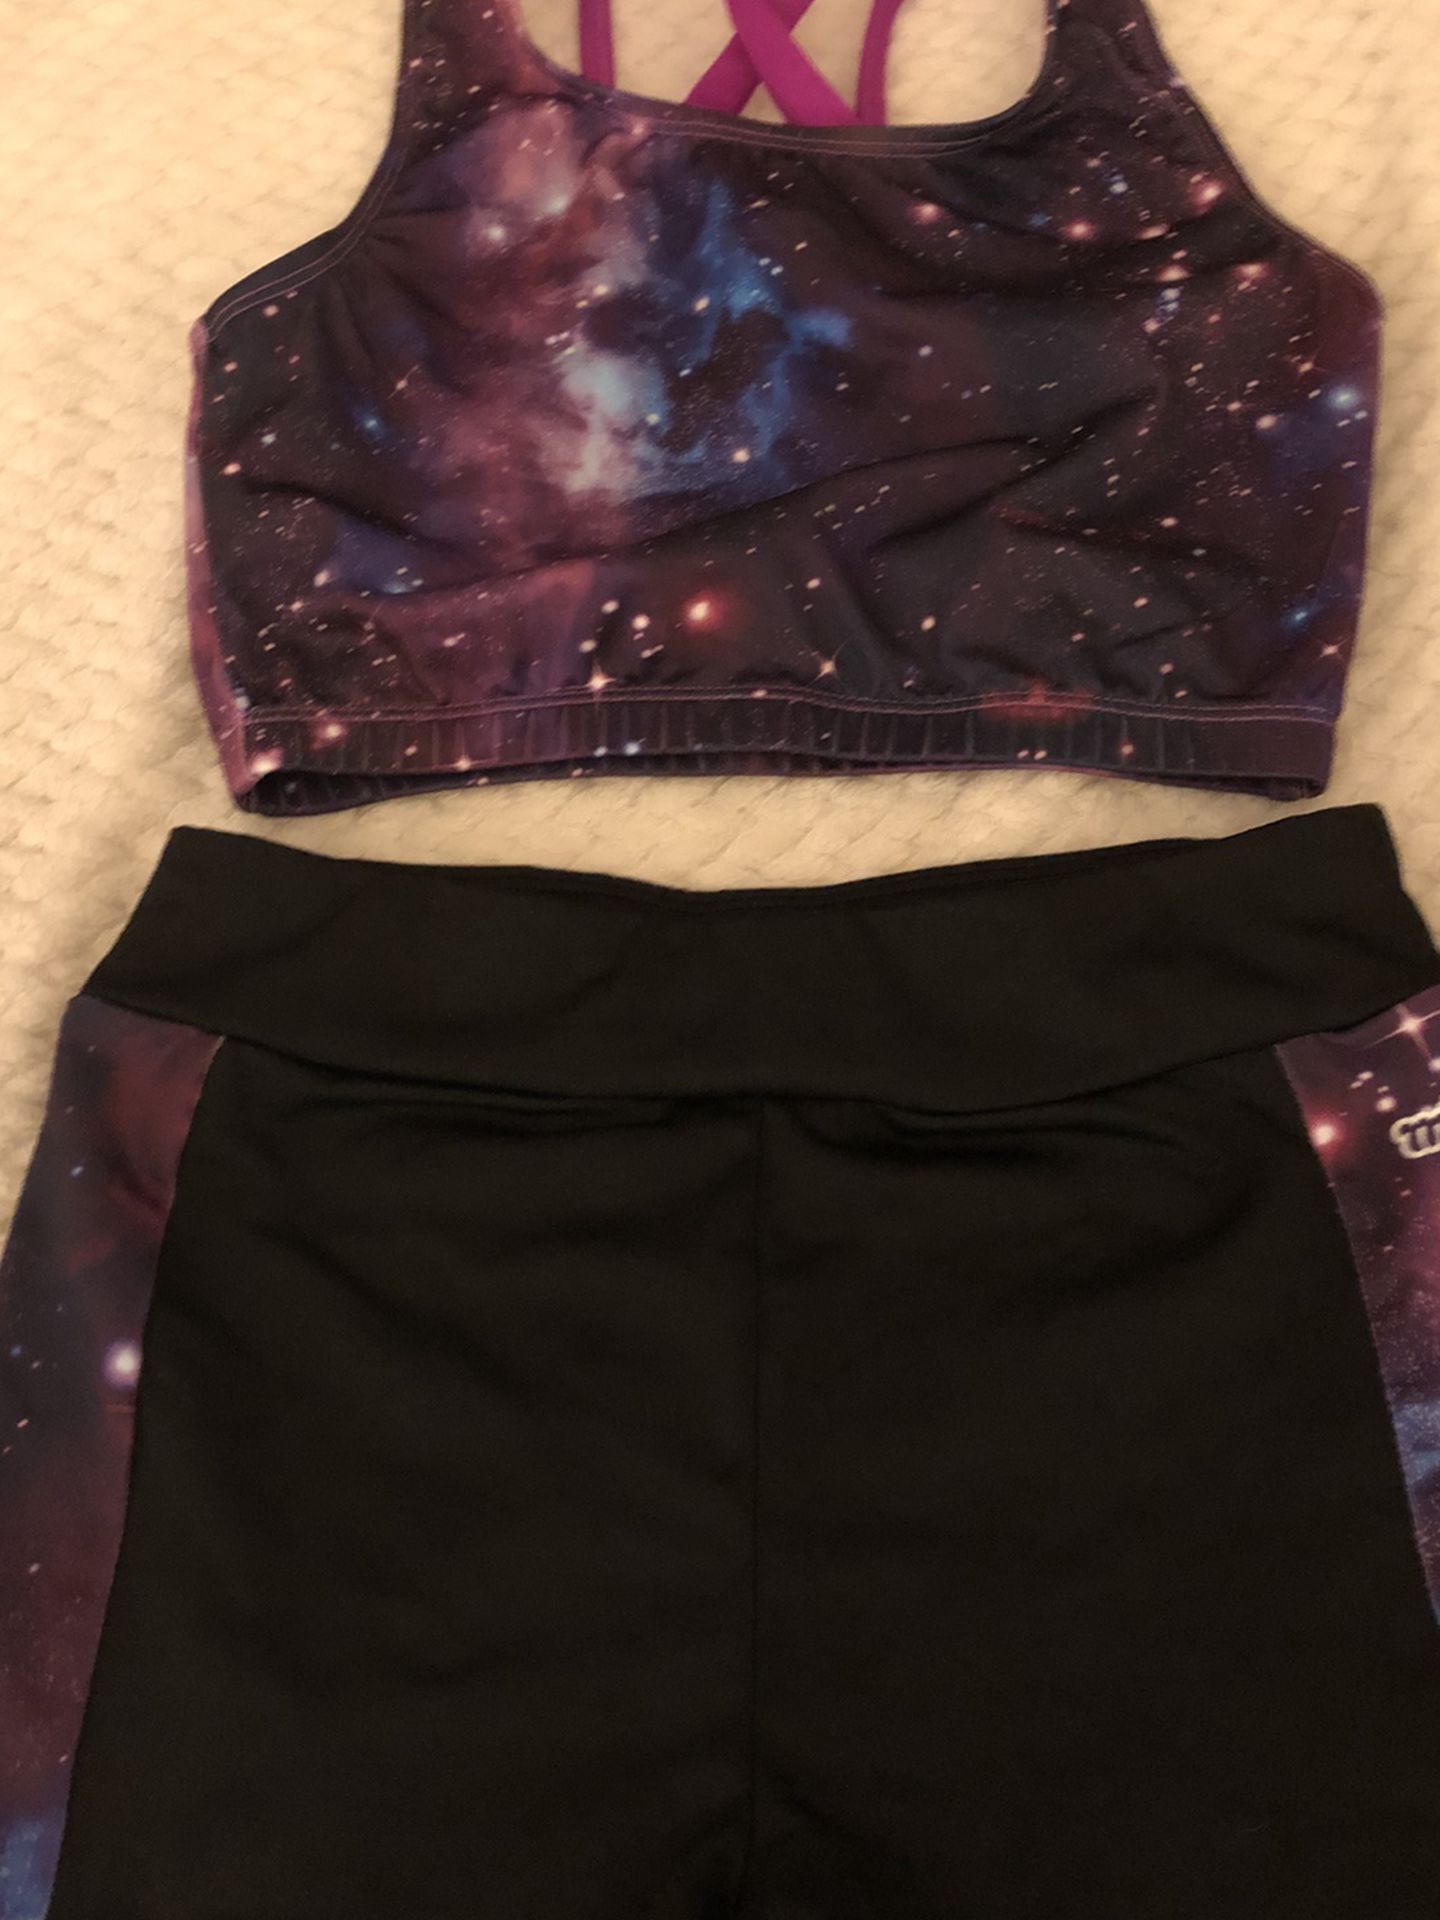 Girls New And Gently Used Gymnastics and Activewear Size L (10/12)